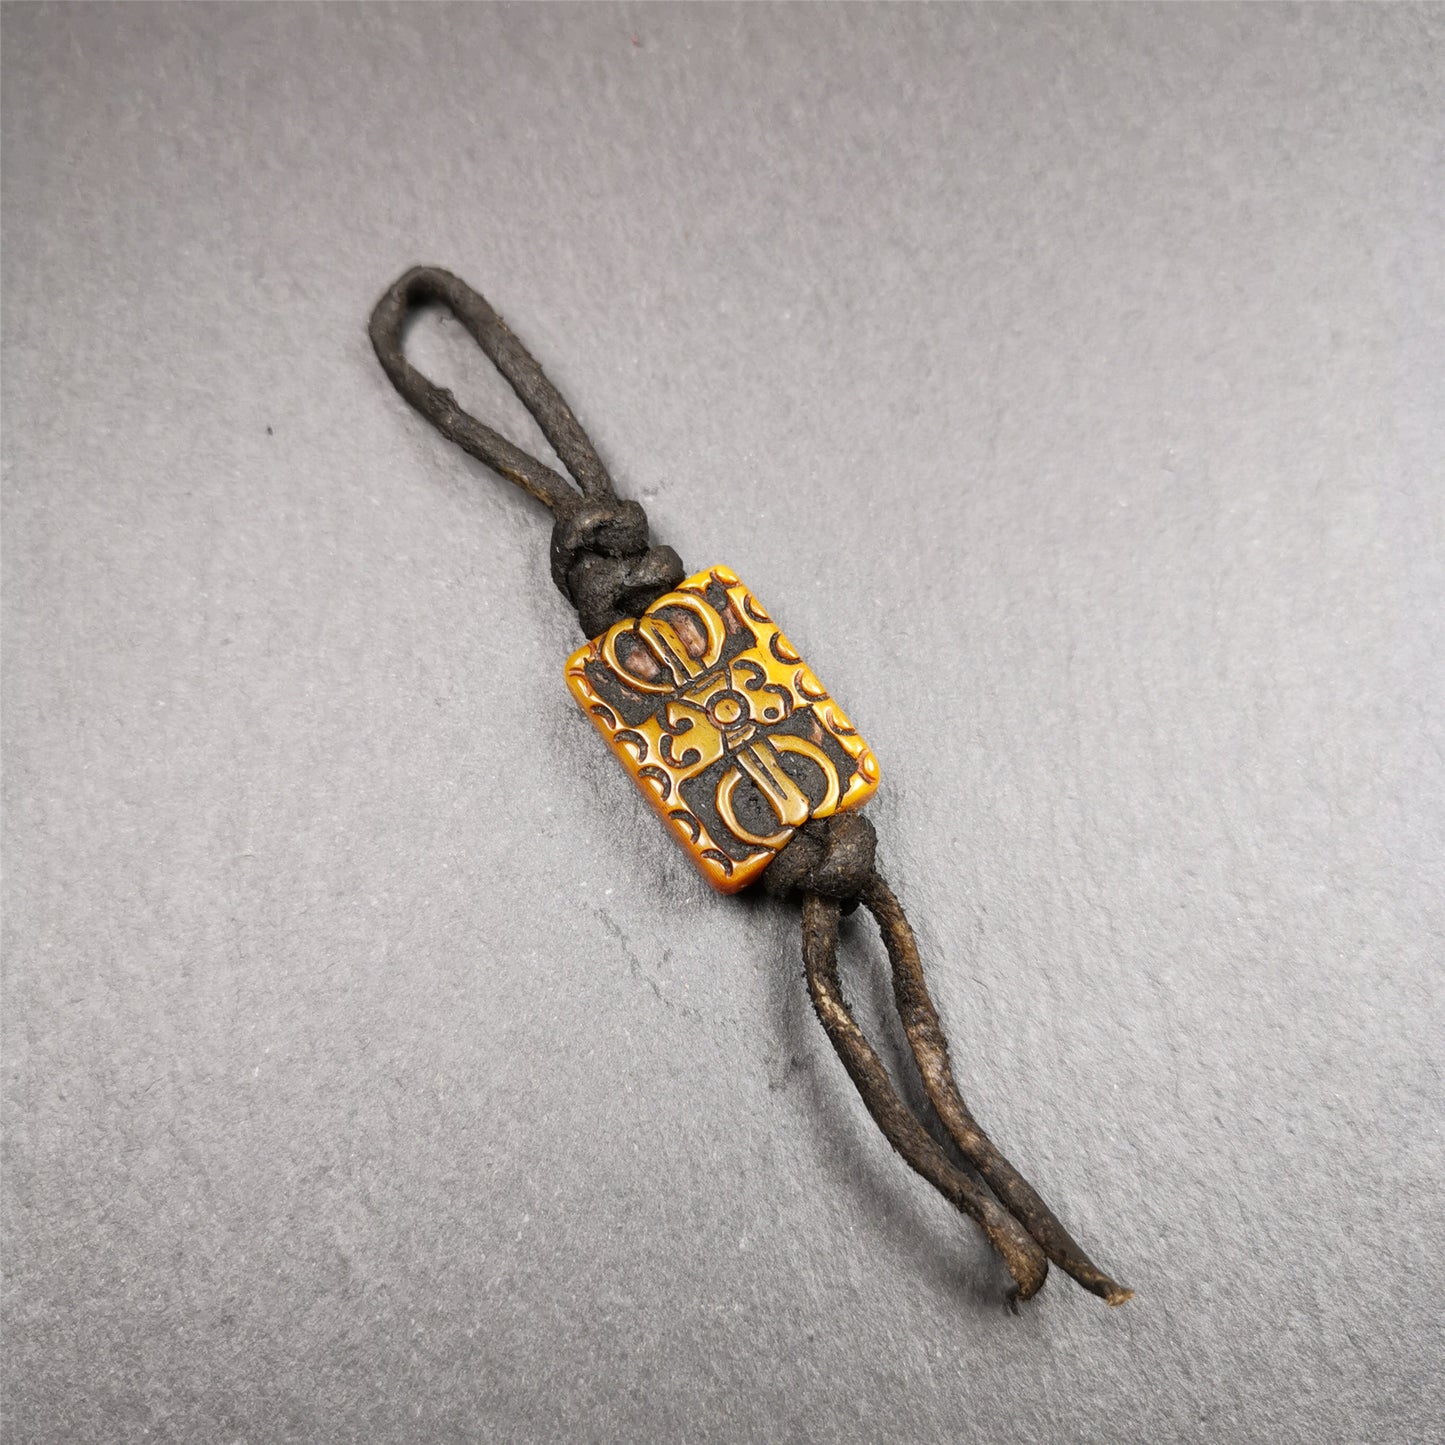 This unique vajra amulet was handmade by Tibetan craftsmen from Tibet in 1990's,blessed in Gengqing Monastry. It is entirely hand-carved yak bone craft, double sided with vajra and other patterns,very beautiful. You can use it as pendant, keychain, bag hanging,or altar rituals .